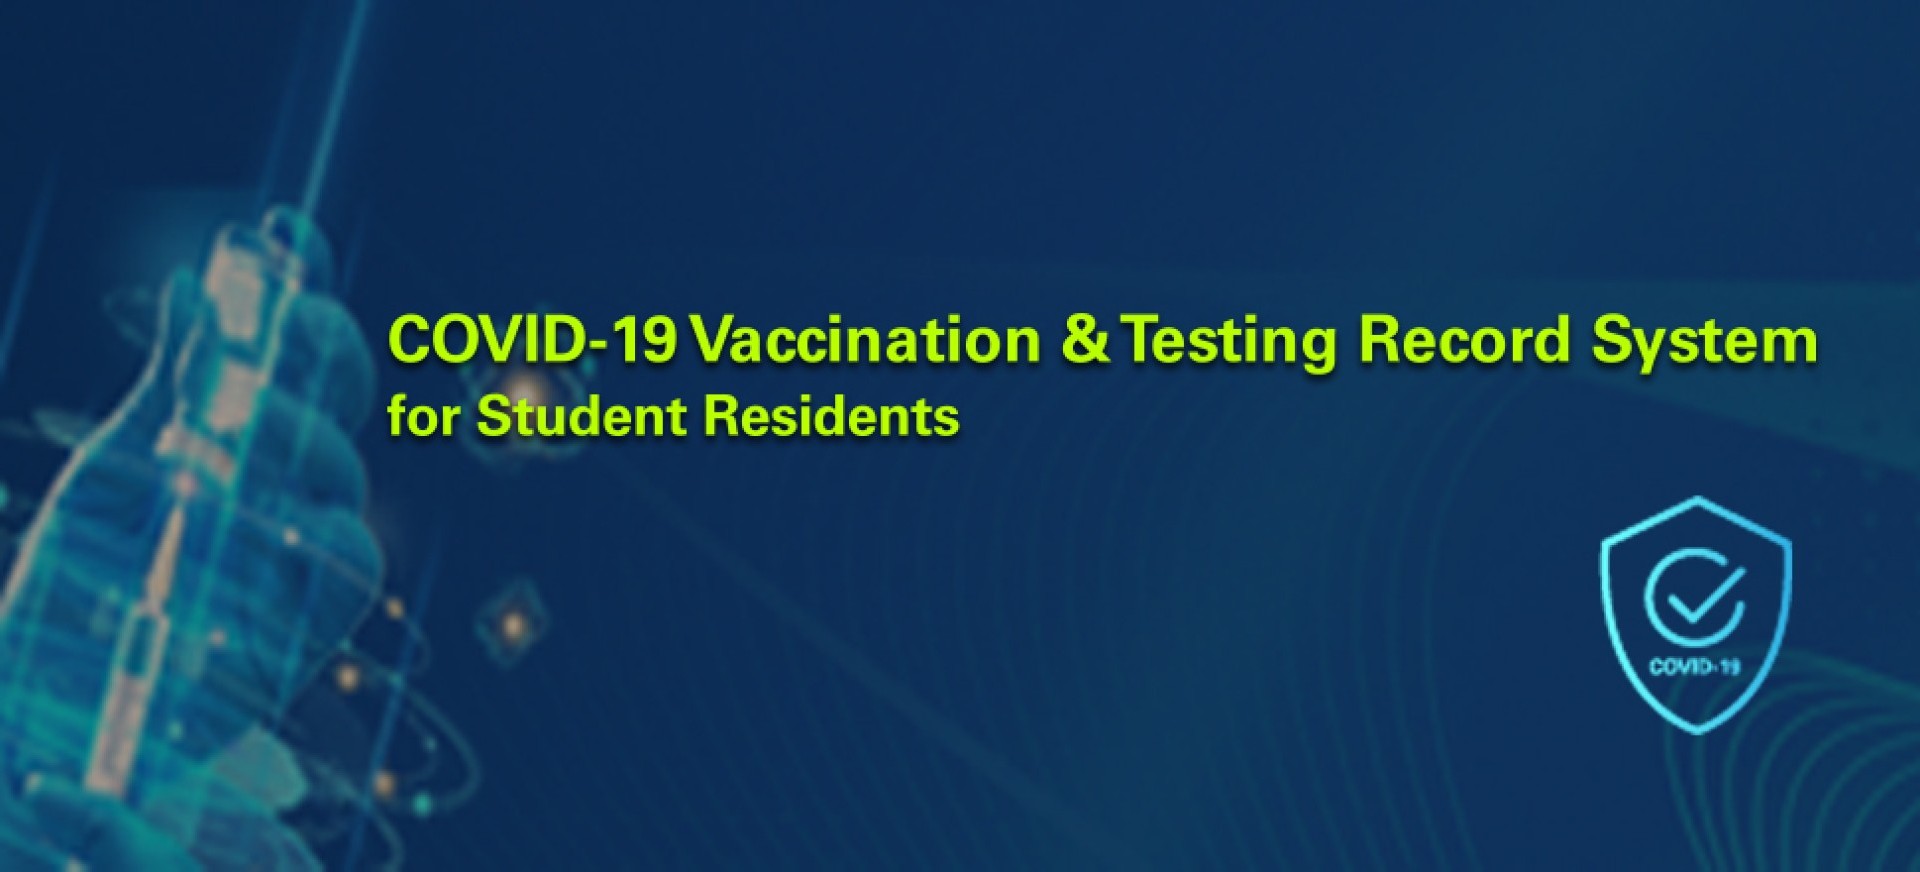 COVID-19 Vaccination & Testing Record System for Student Residents